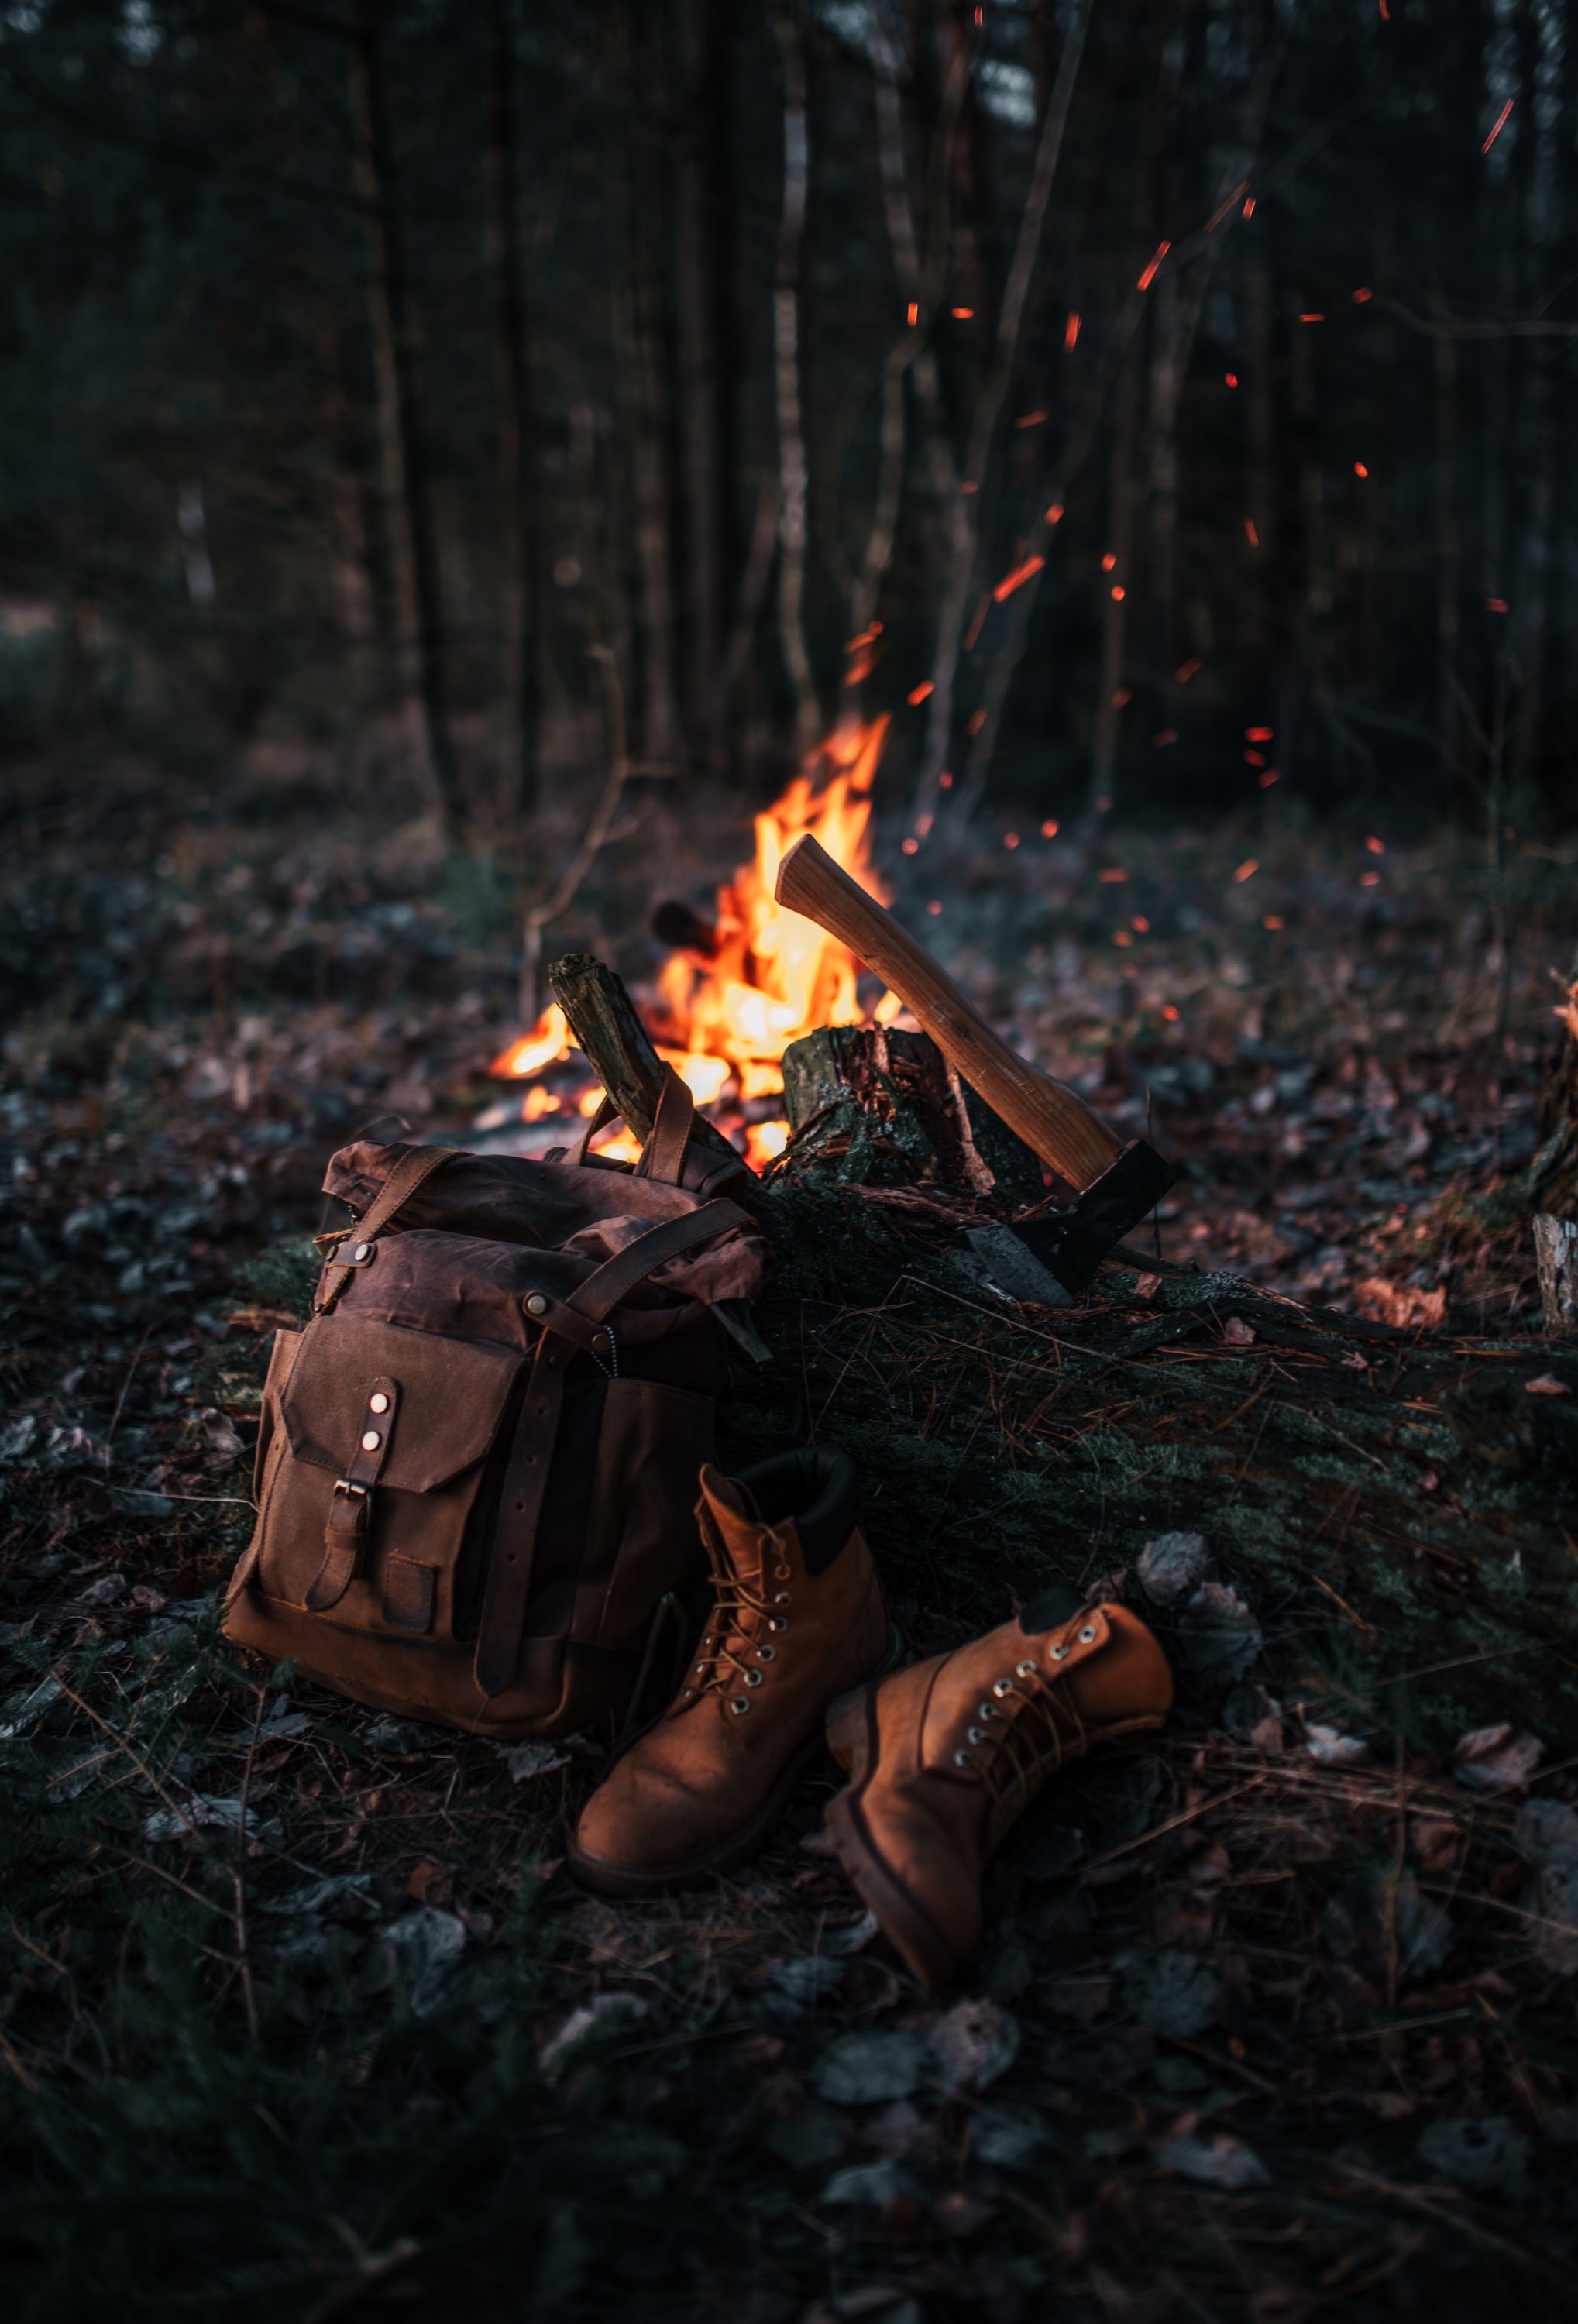 android nature, shoes, bonfire, miscellanea, miscellaneous, boots, backpack, rucksack, ax, axe